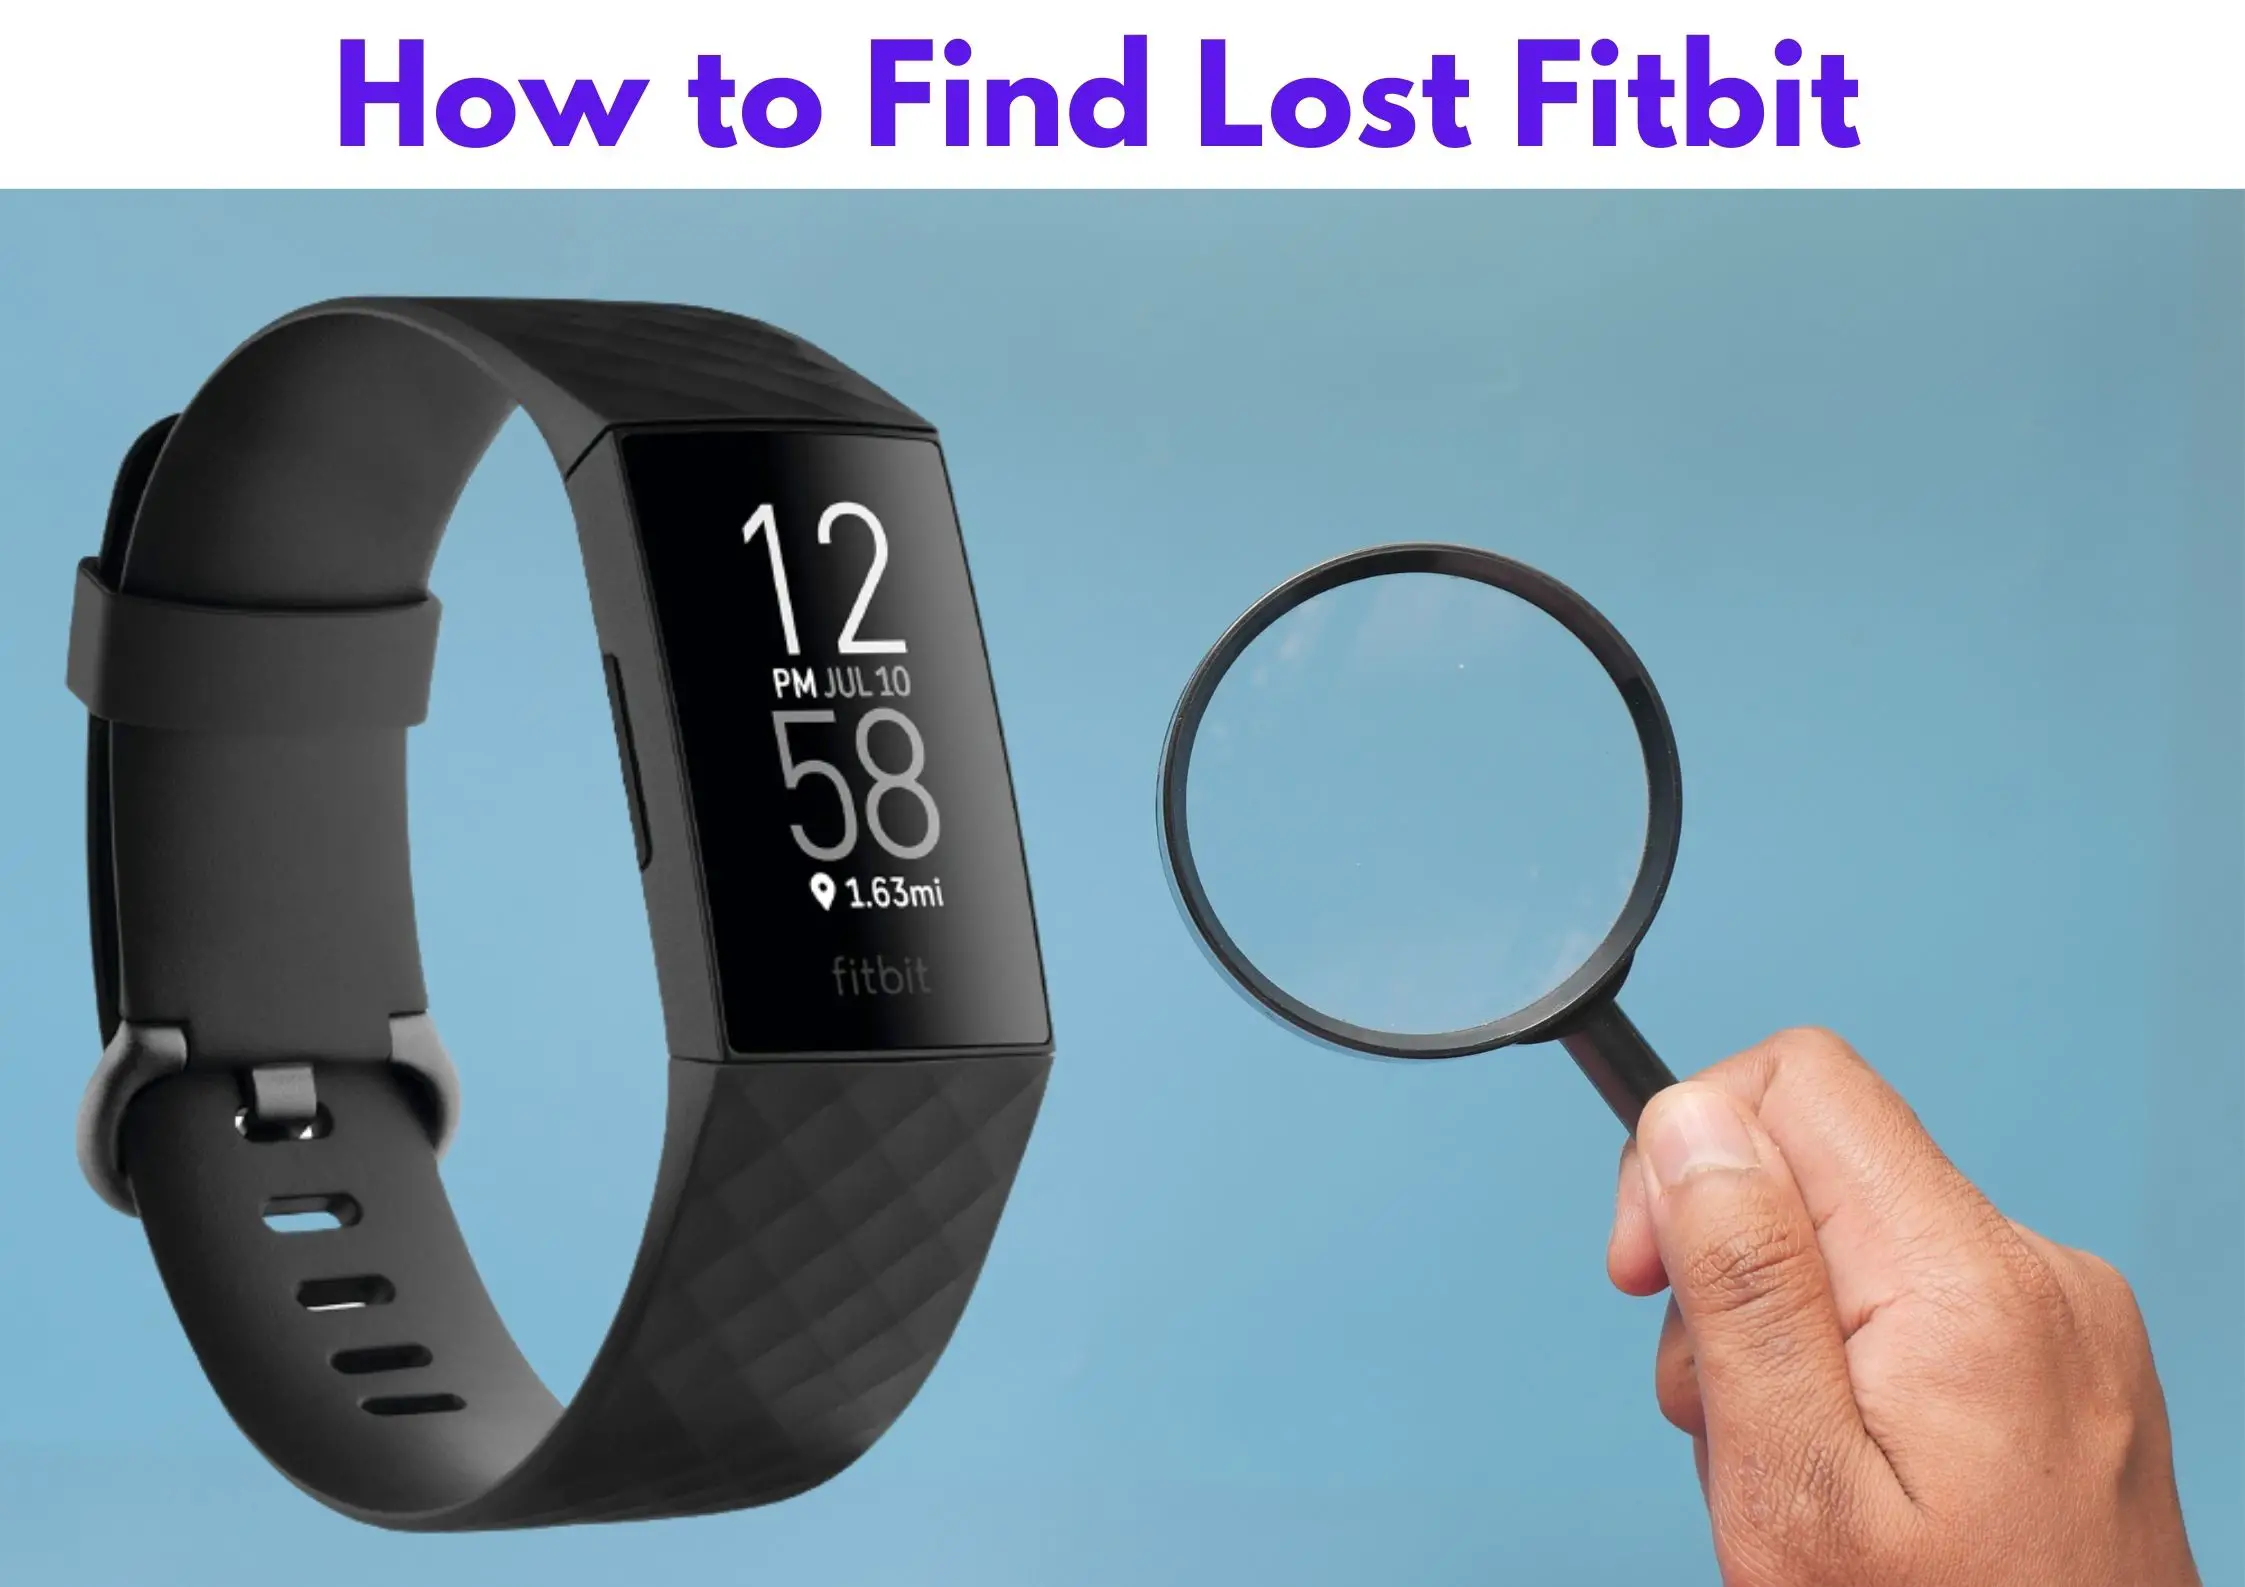 How to Find Lost Fitbit